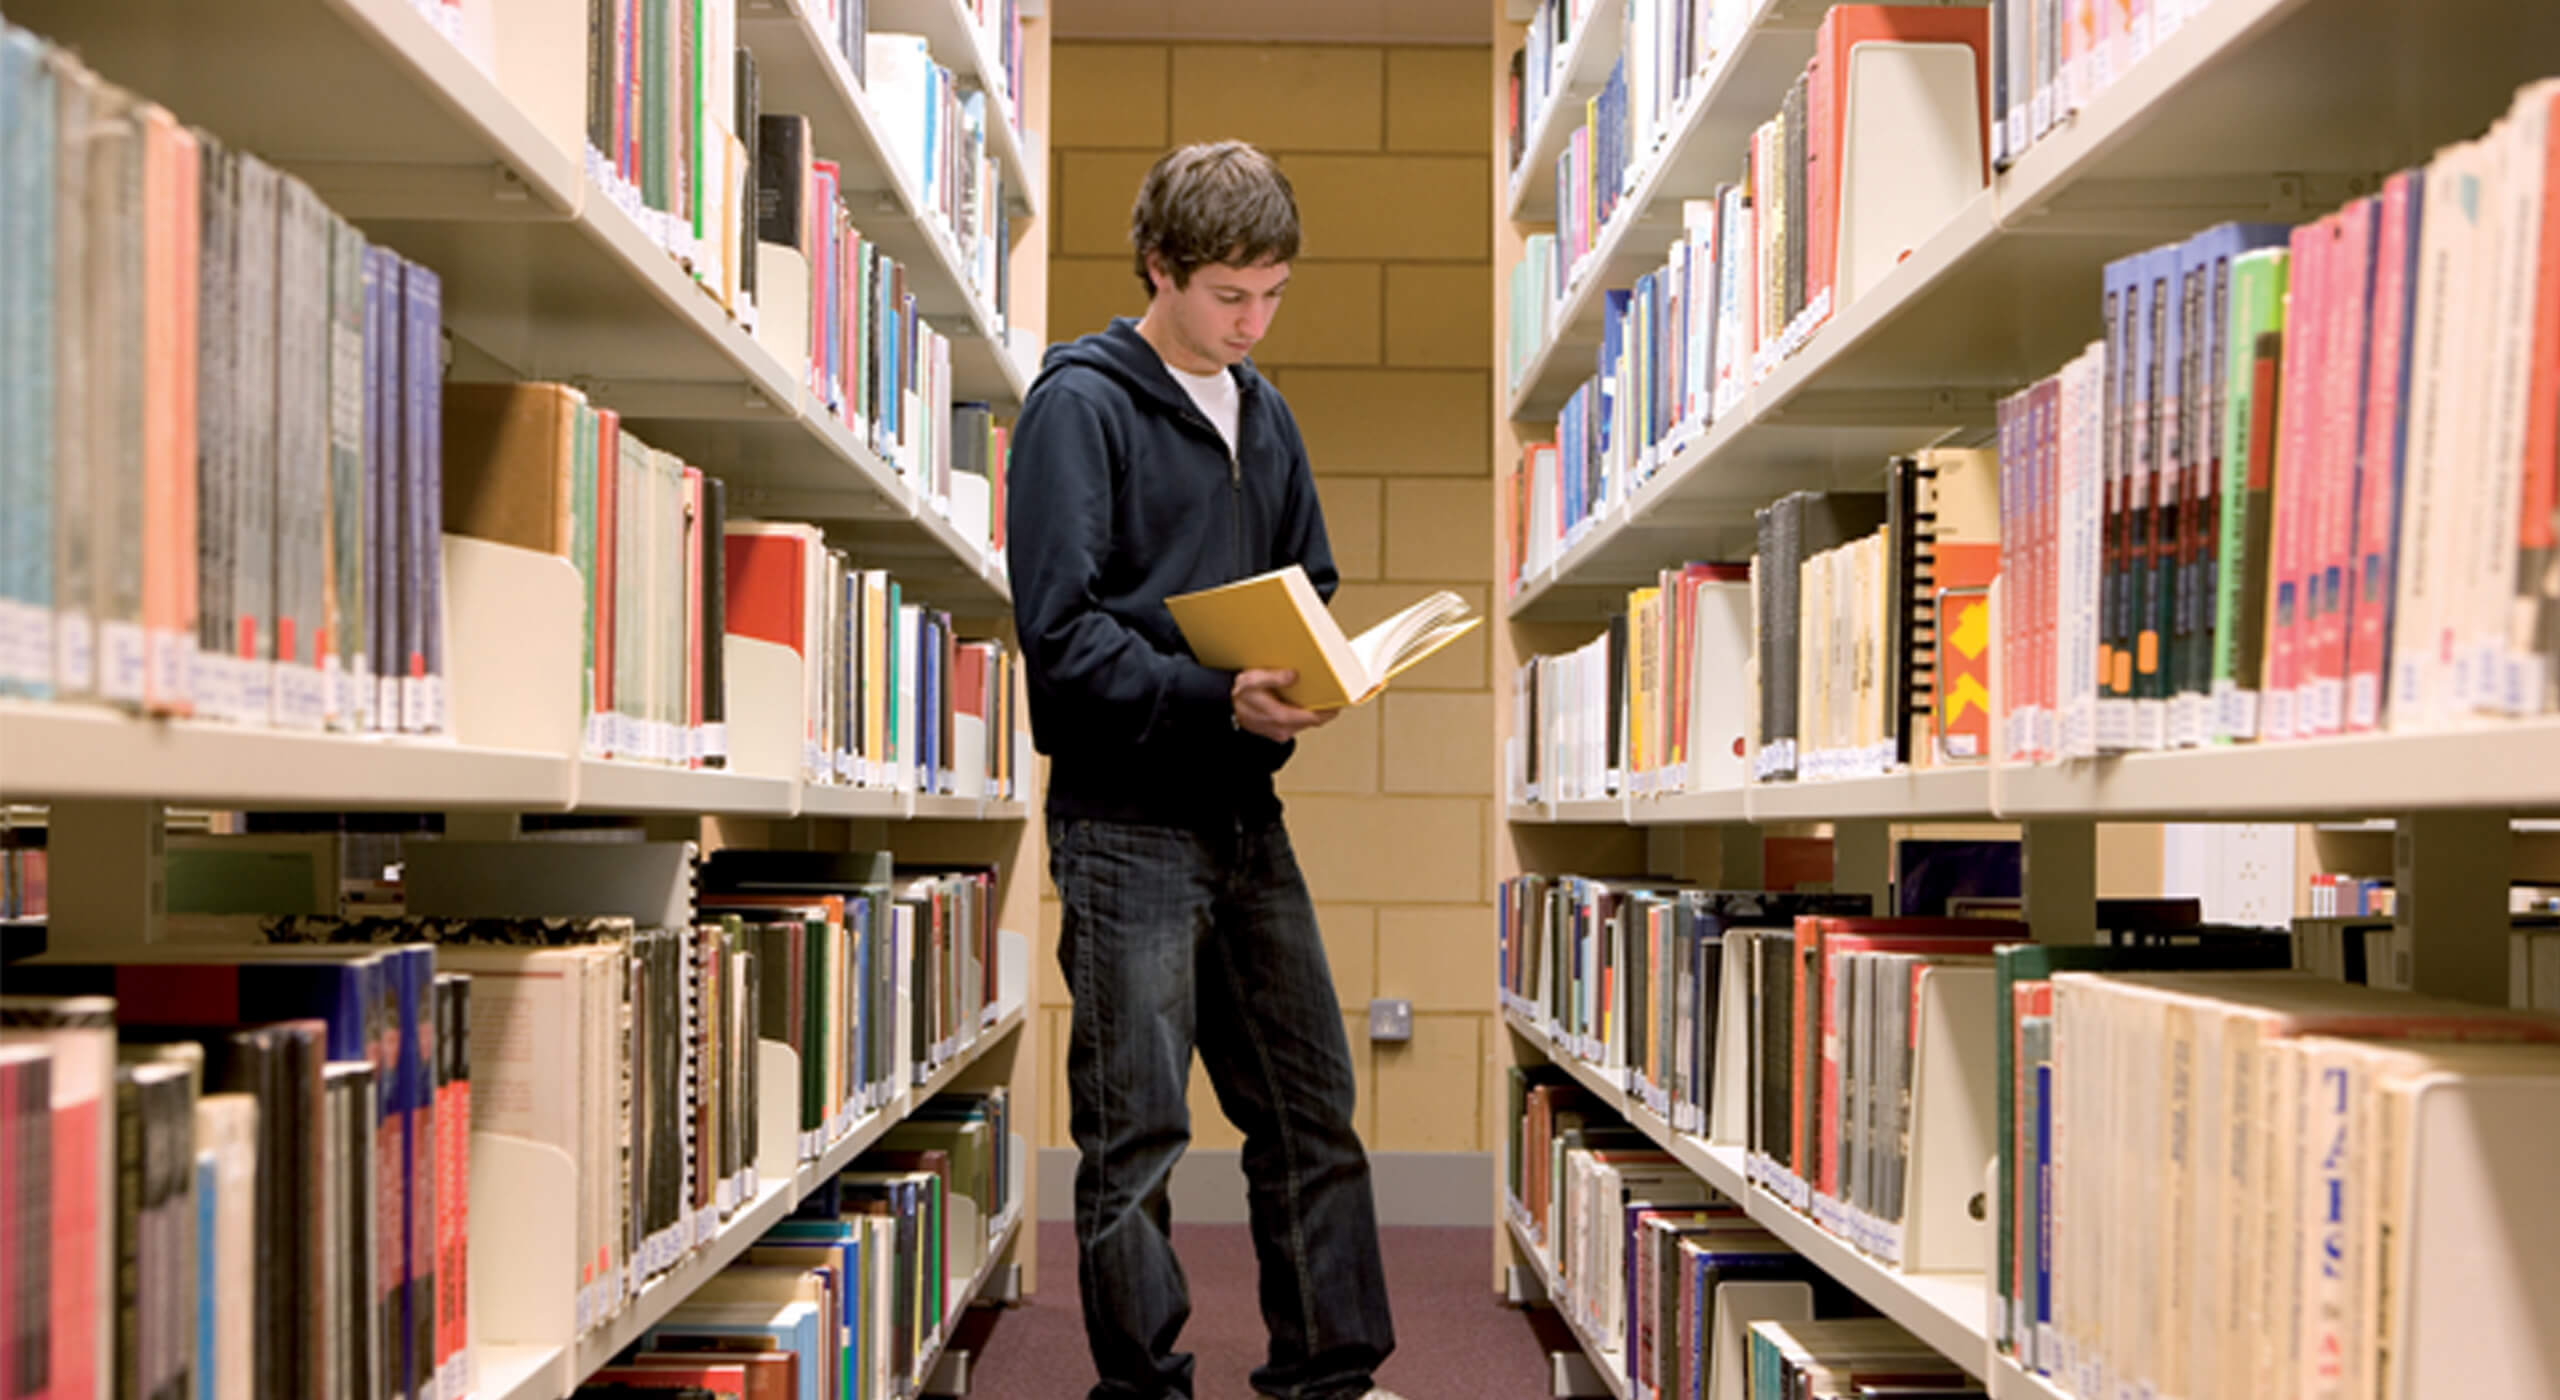 Childhood studies | male in library browsing books